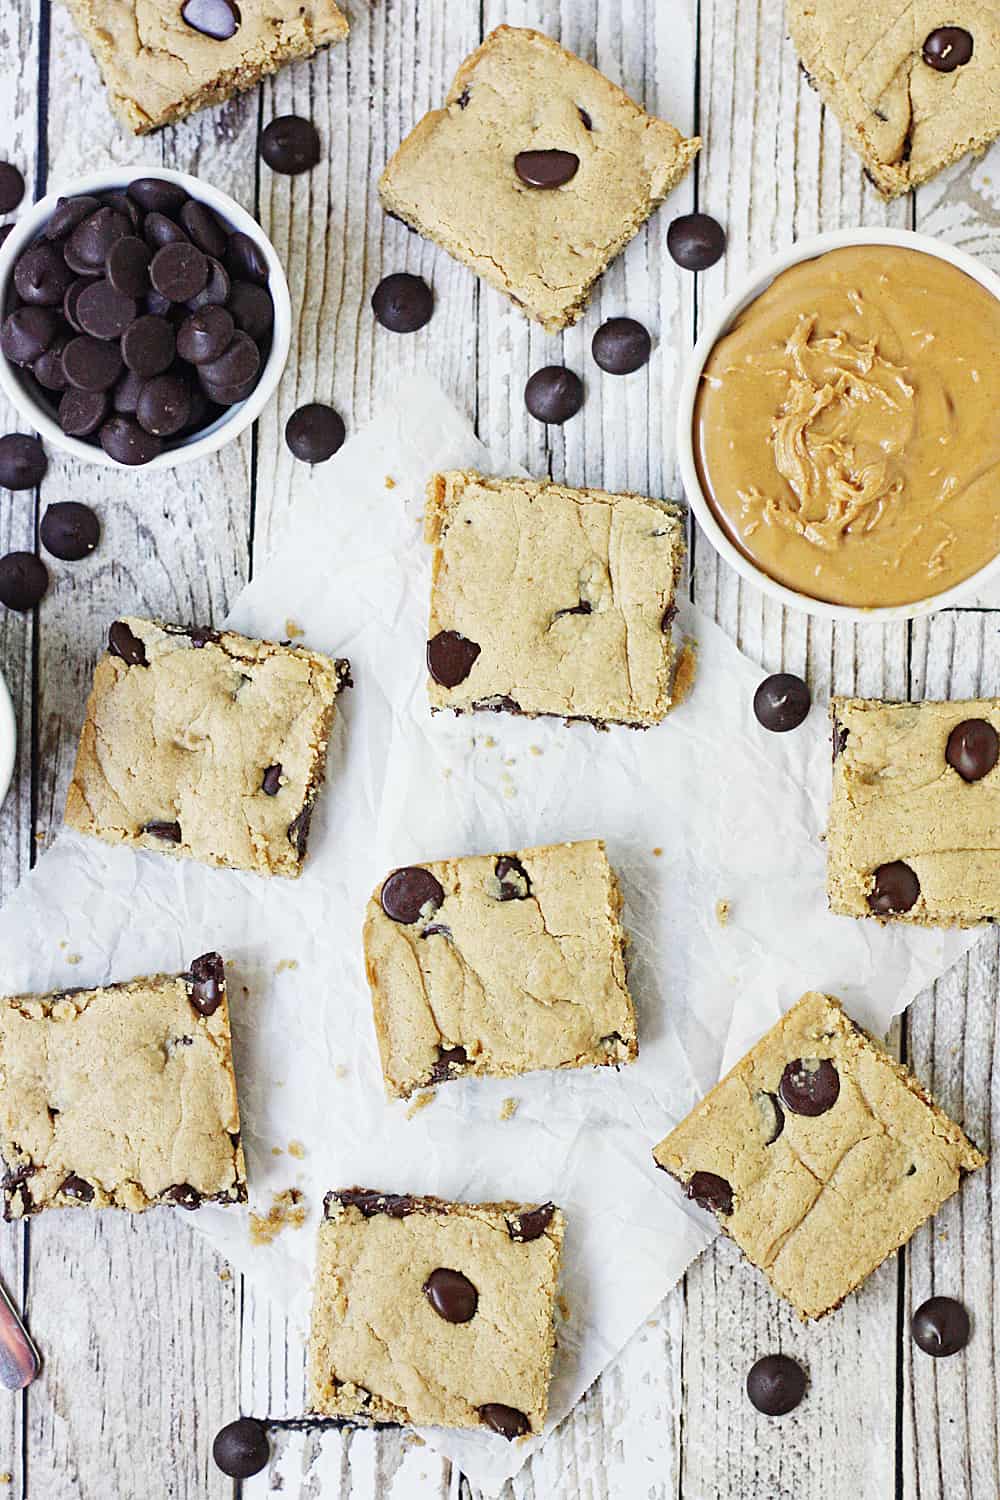 Healthy Peanut Butter Brownies with Dark Chocolate Chips -- These healthy peanut butter brownies are full of peanut butter flavor but not full of sugar and carbs. Dark chocolate chips make them even yummier! #healthy #healthyrecipe #lowcarb #brownies #healthybrownies #baking #healthybaking #halfscratched #peanutbutter #peanutbutterbrownies